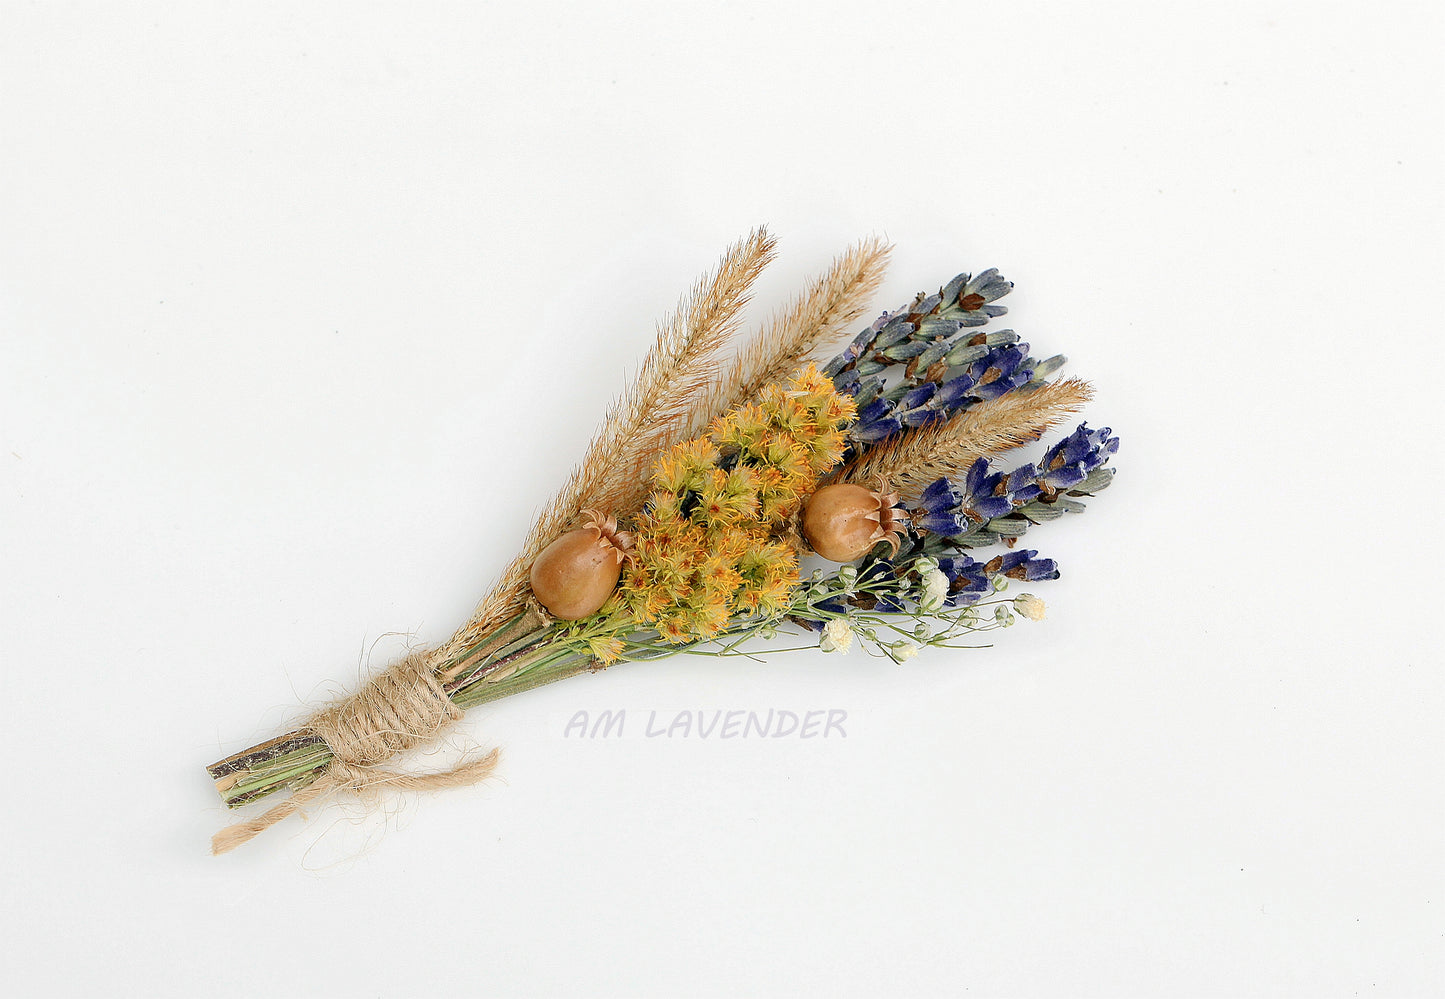 Boutonniere / Corsage : Harvest In Provence | AM Lavender